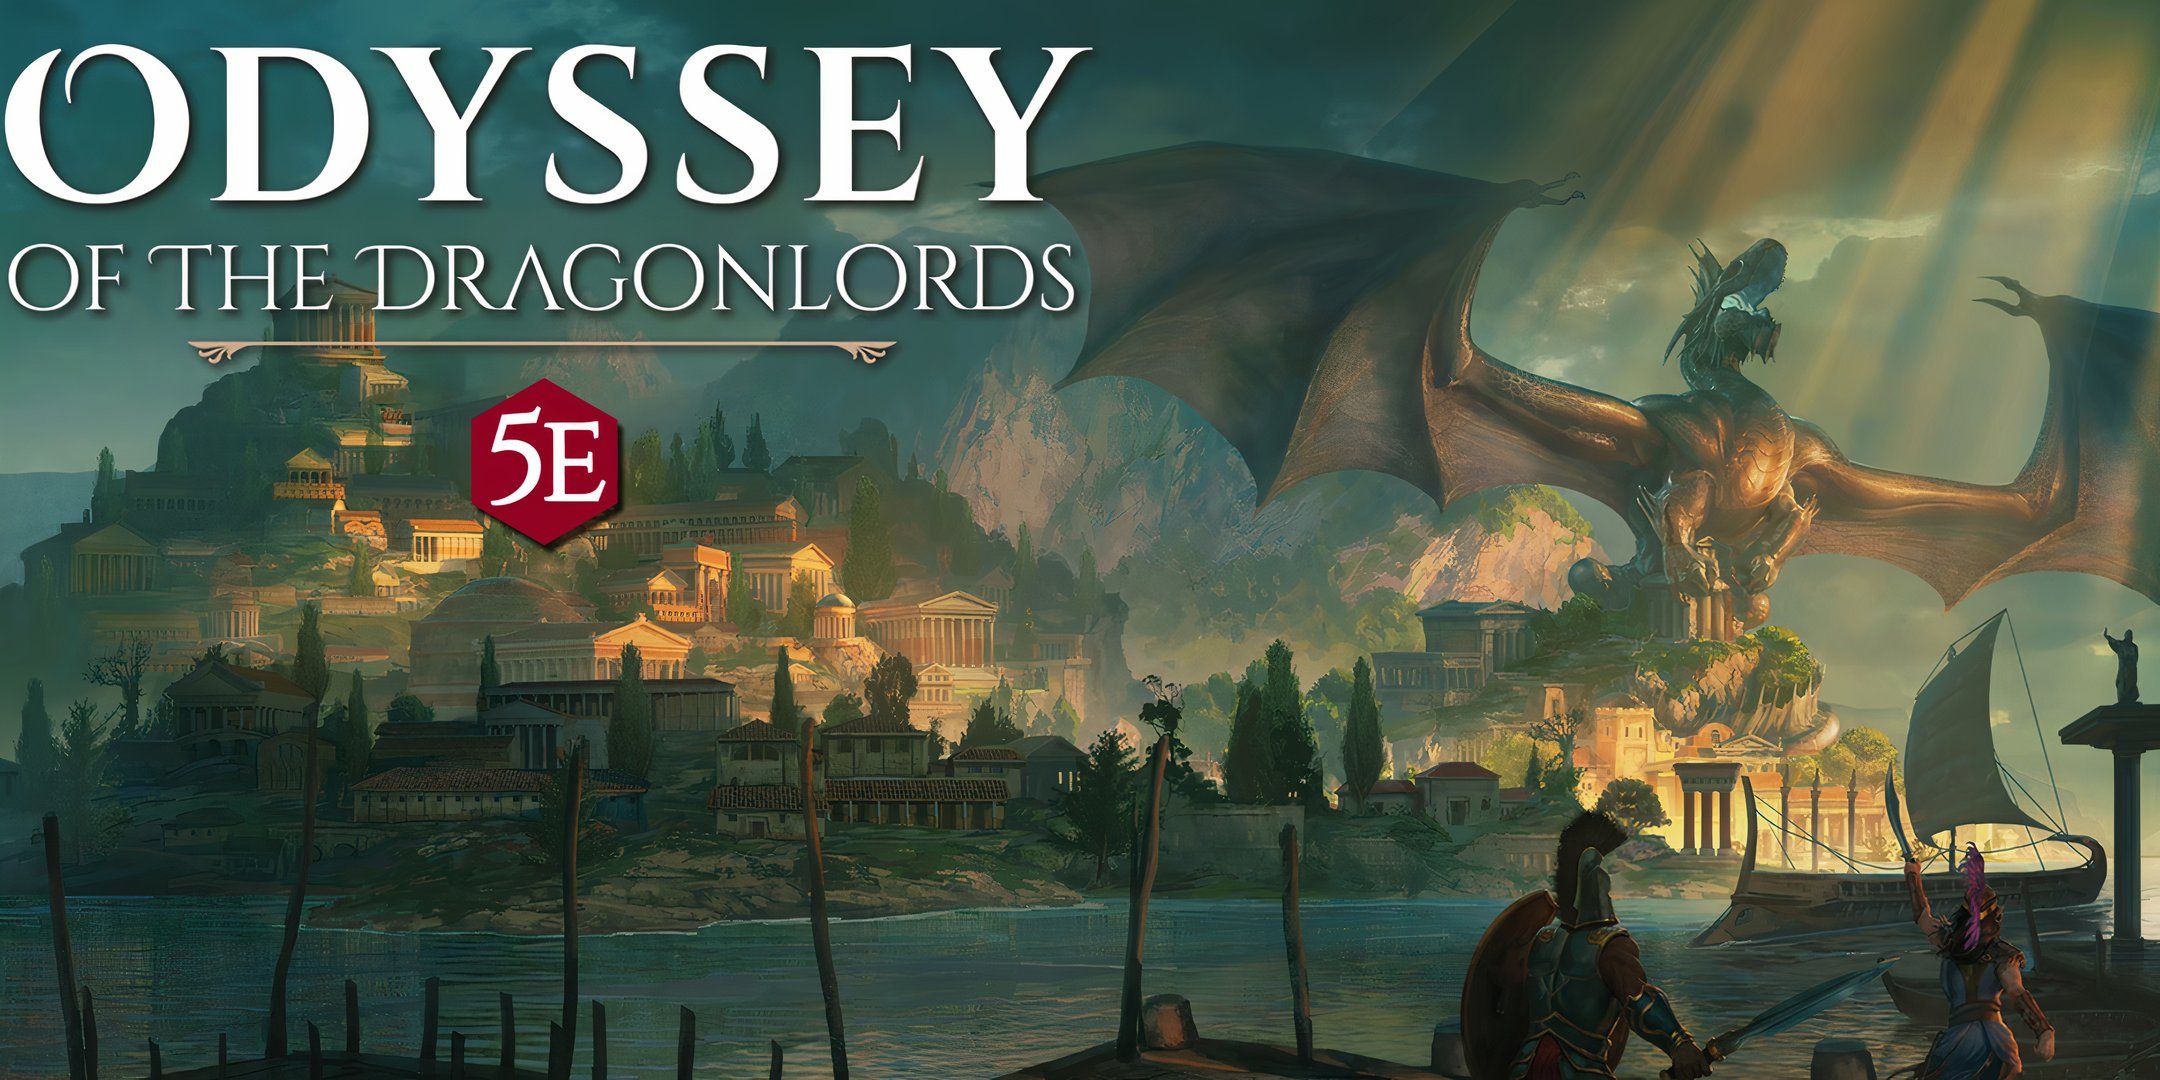 Odyssey of the Dragonlords